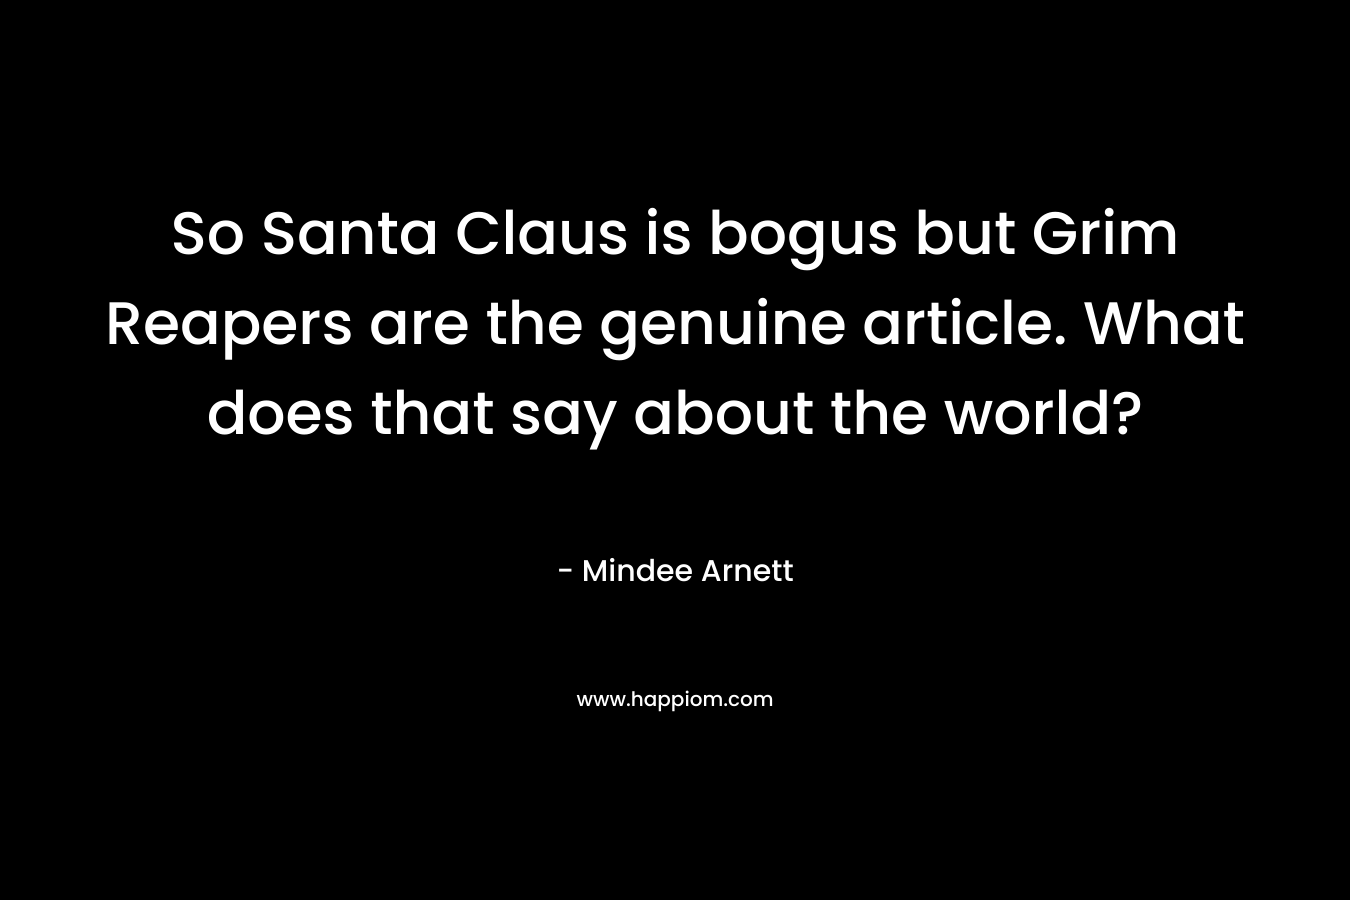 So Santa Claus is bogus but Grim Reapers are the genuine article. What does that say about the world? – Mindee Arnett